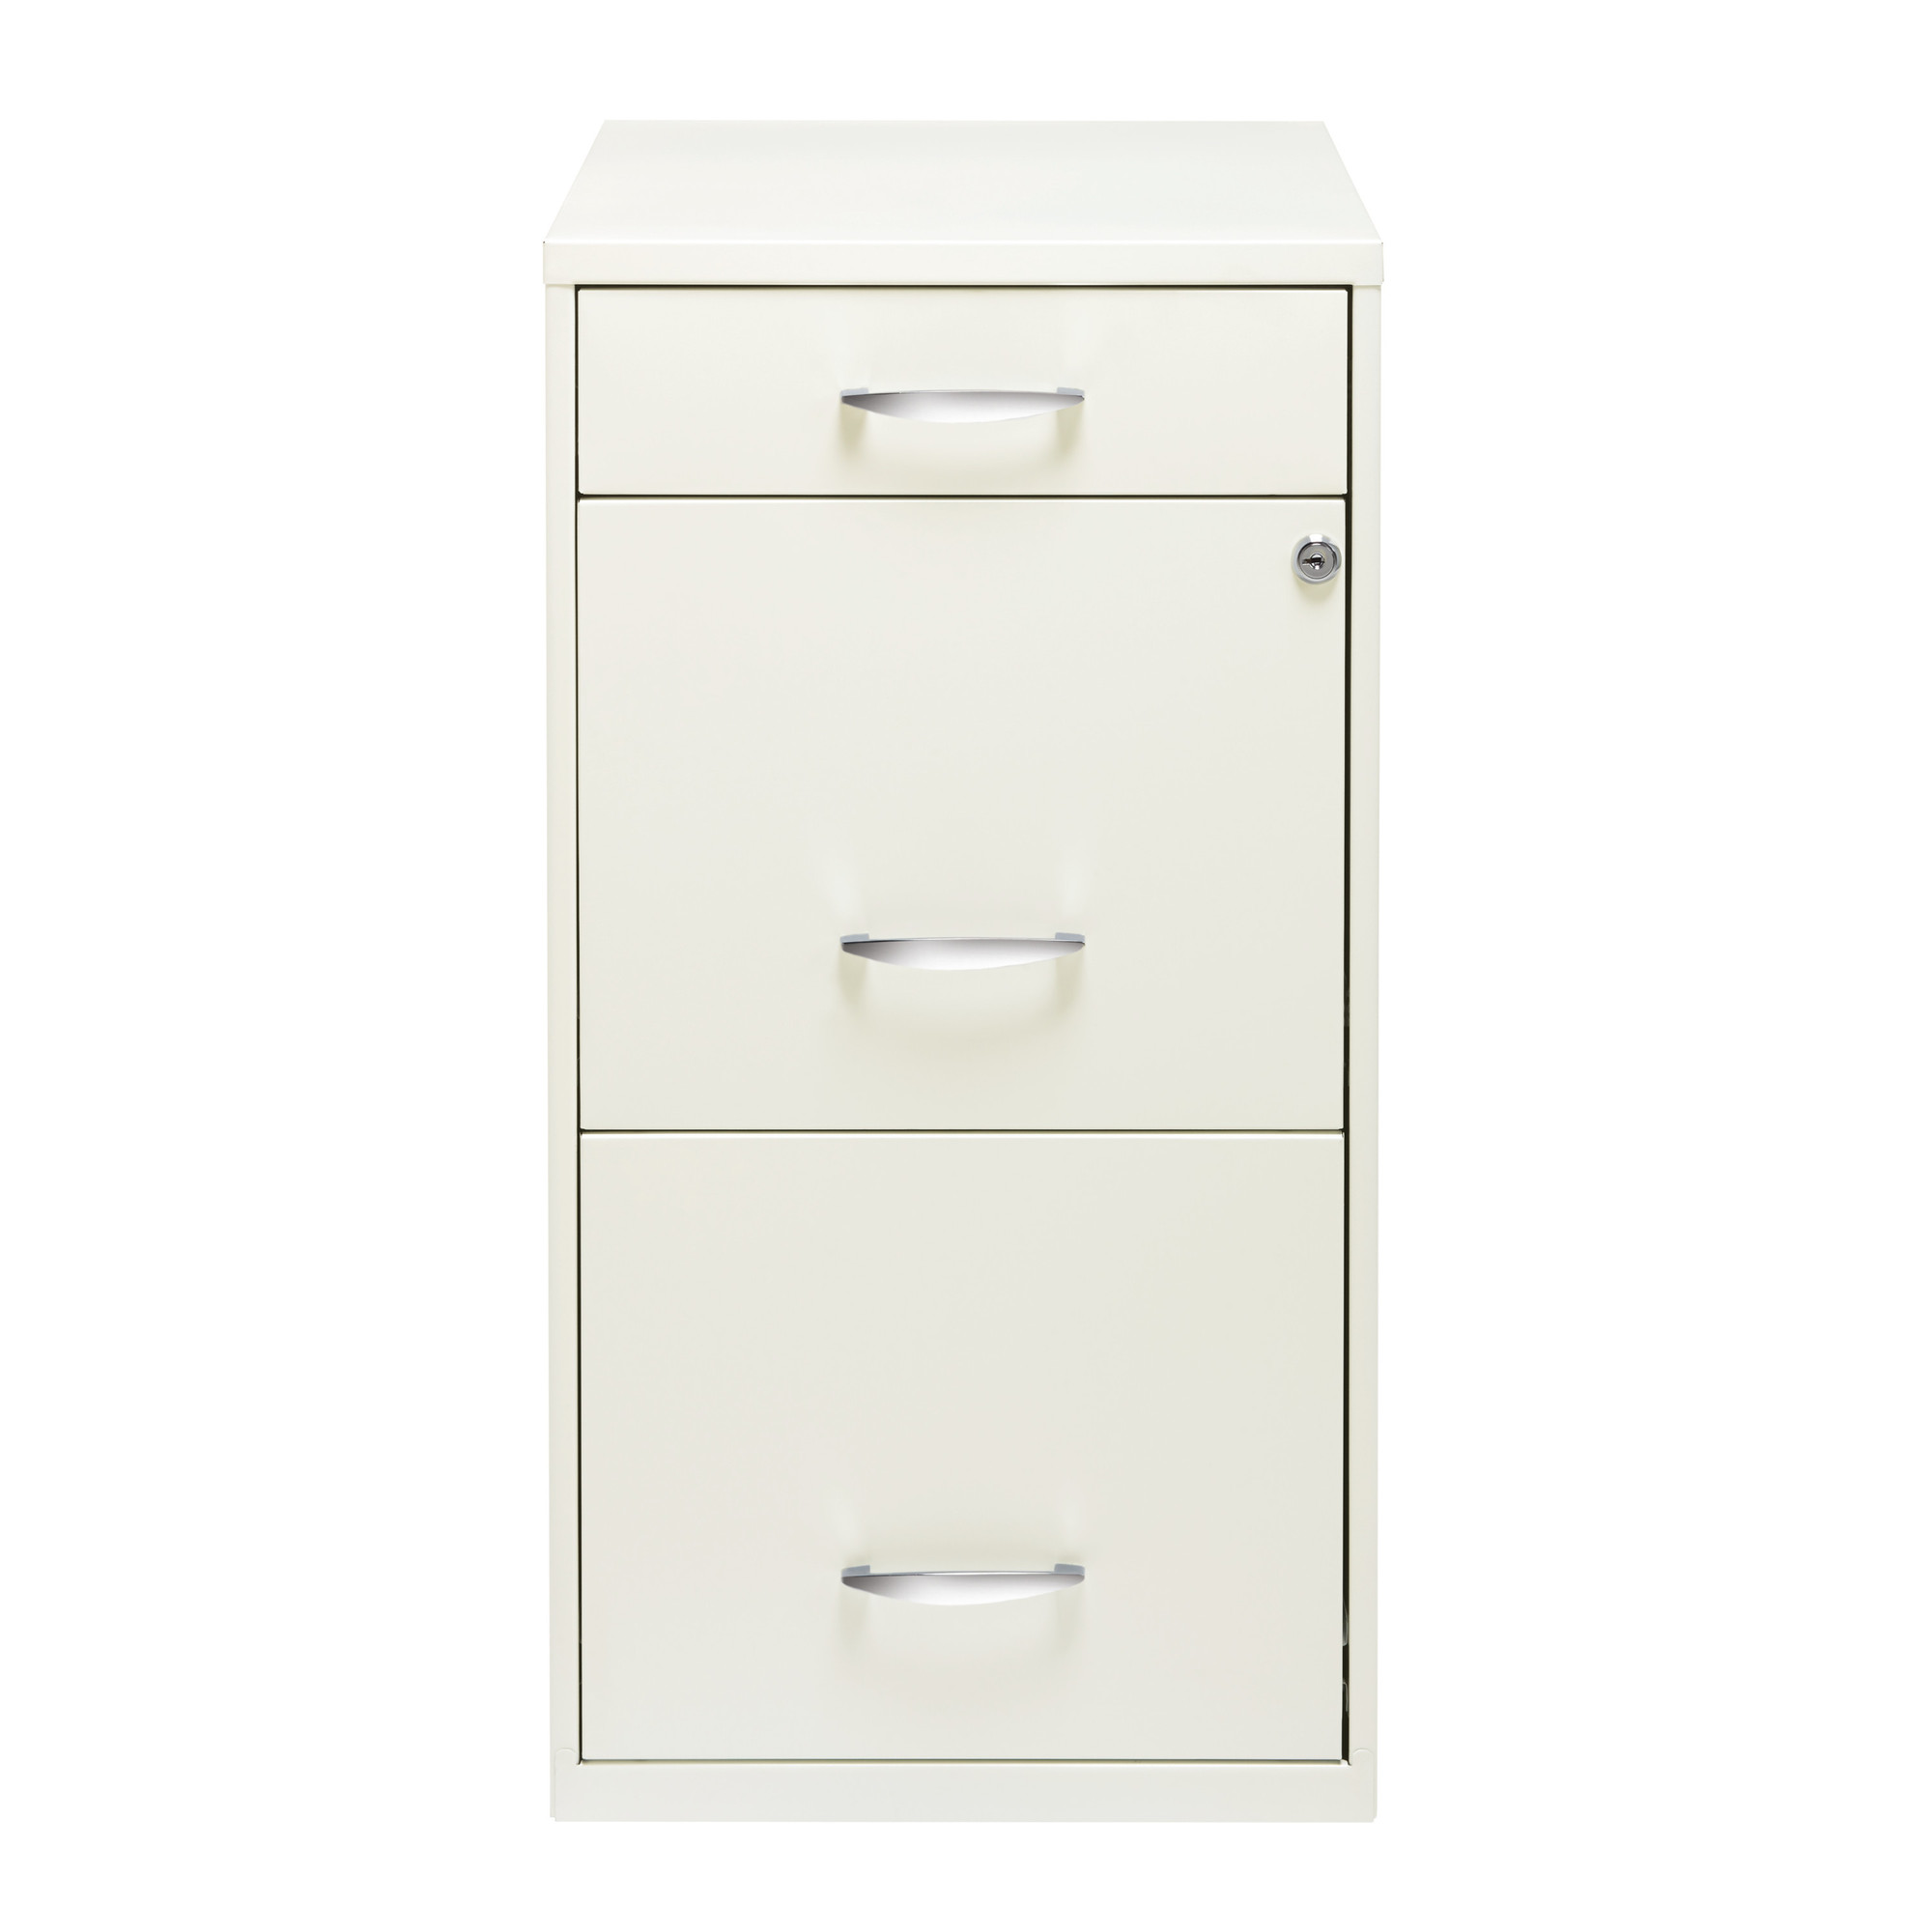 Hirsh Industries, 3 Drawer Letter Width File Cabinet, Pencil Drawer, Width 14.25 in, Depth 18 in, Height 27.32 in, Model 19157